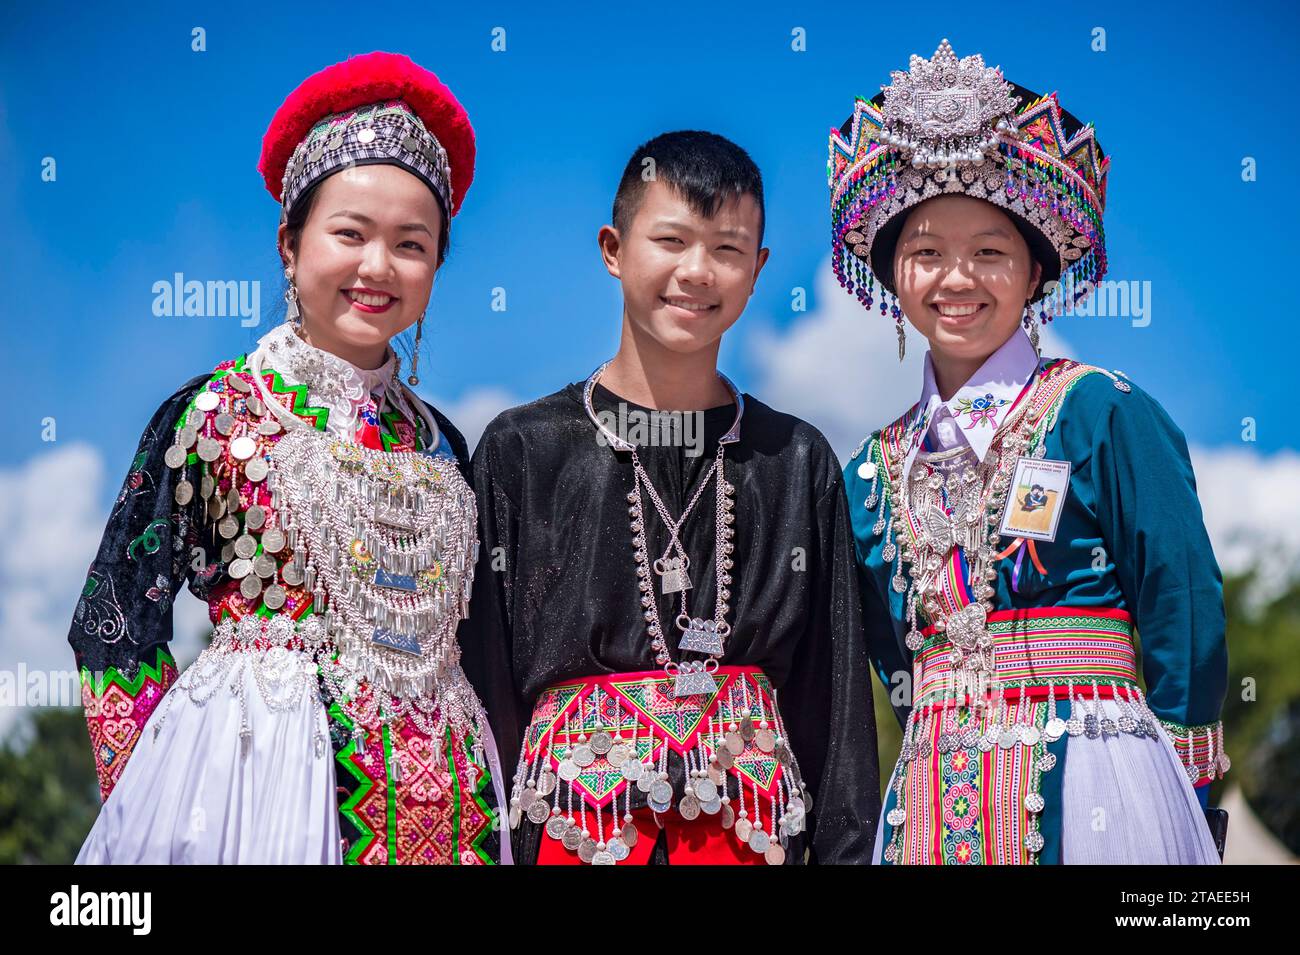 France, Guyana, Cacao (village), H'Mông New Year ceremony in traditional Guyanese dress, borrowing and combining symbols from South-East Asia and China to create new aesthetic codes Stock Photo